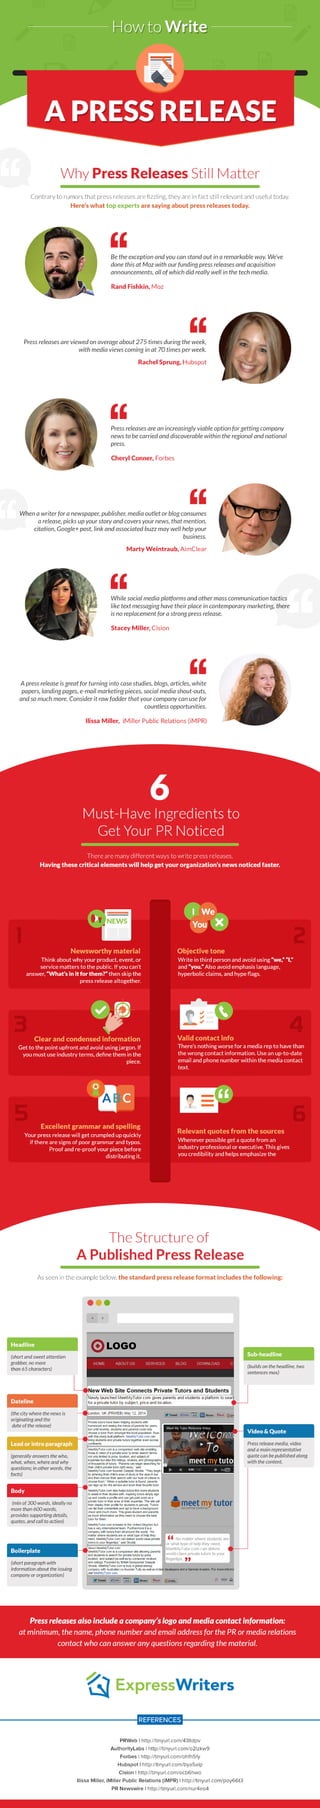 How To Write A Press Release - Infographic